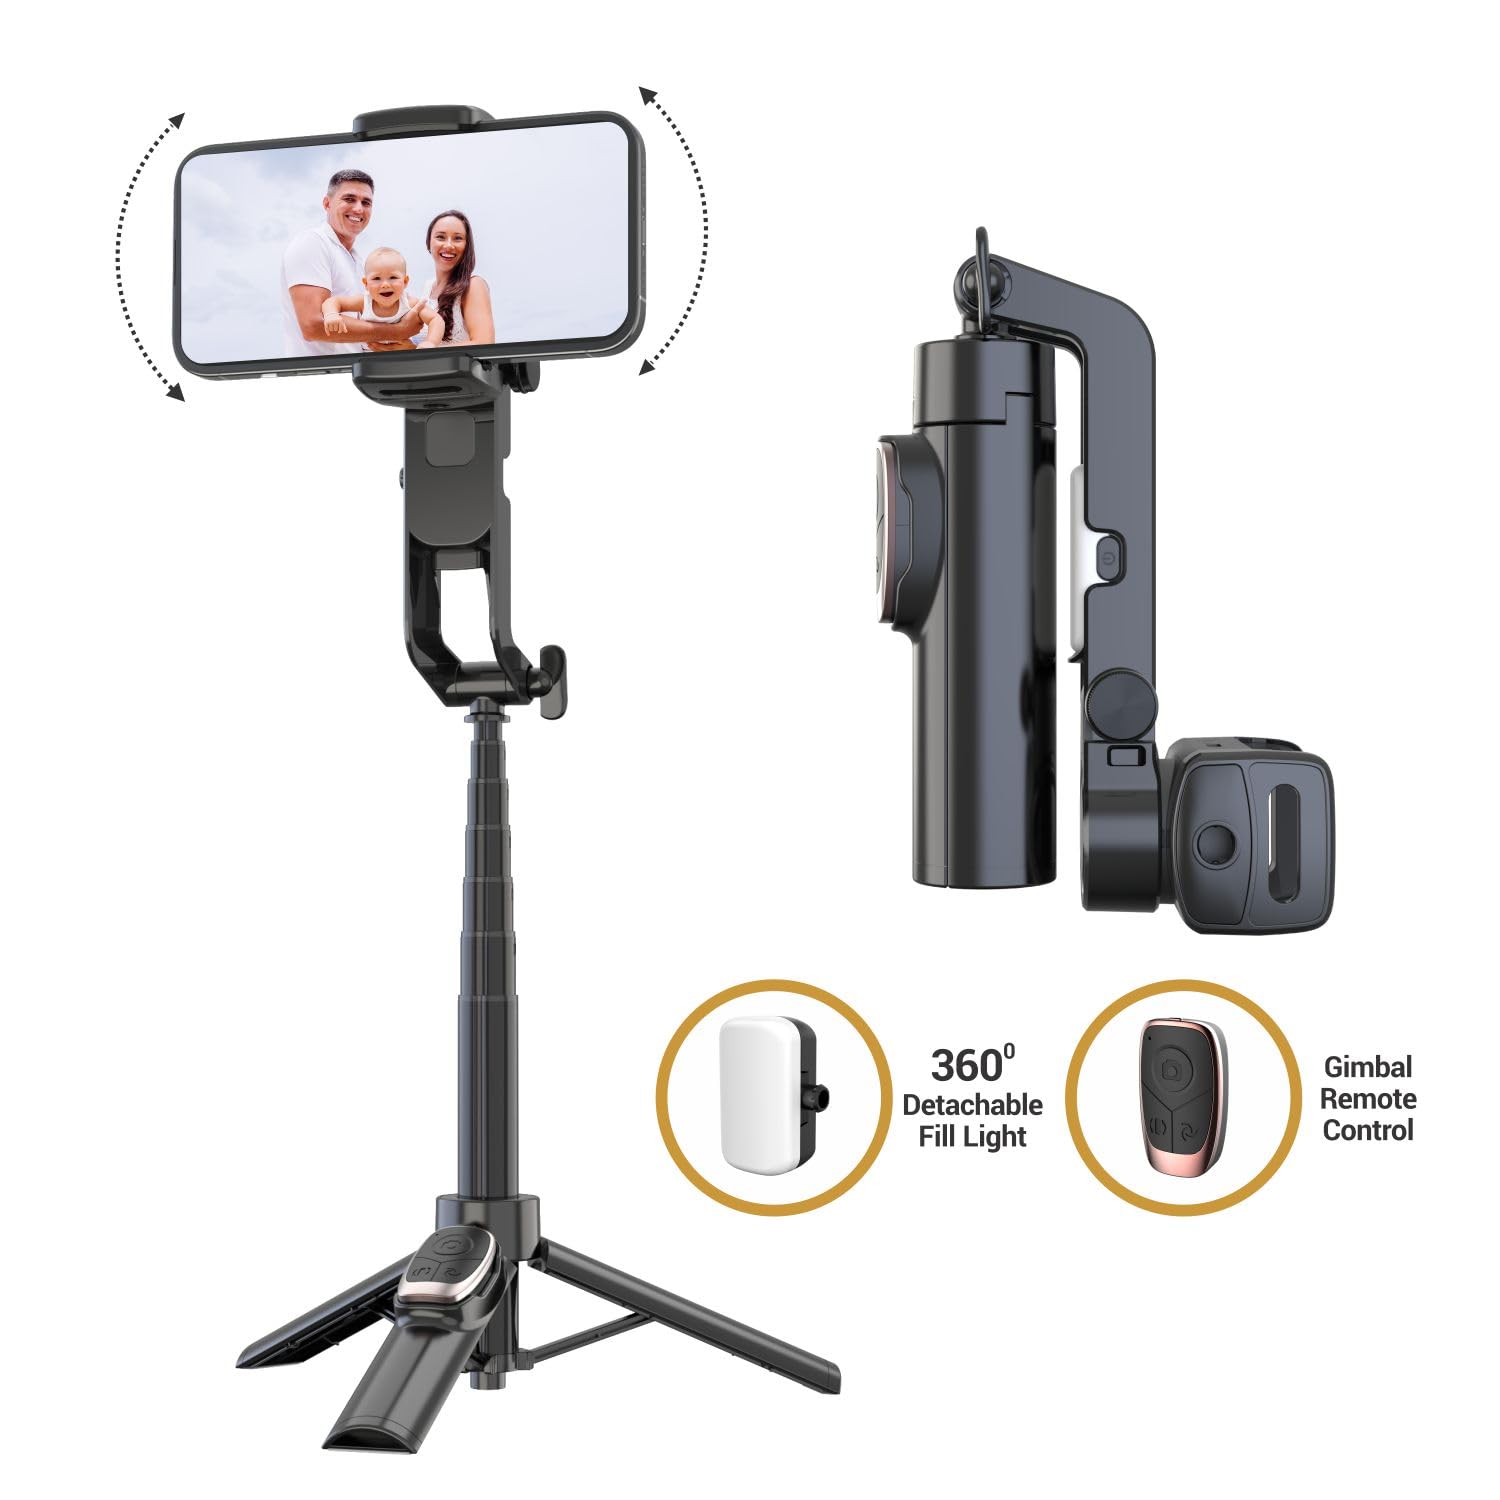 Digitek (DSG 001) Single Axis Foldable Tripod Gimbal with Remote Control Function & Detachable Fill Light